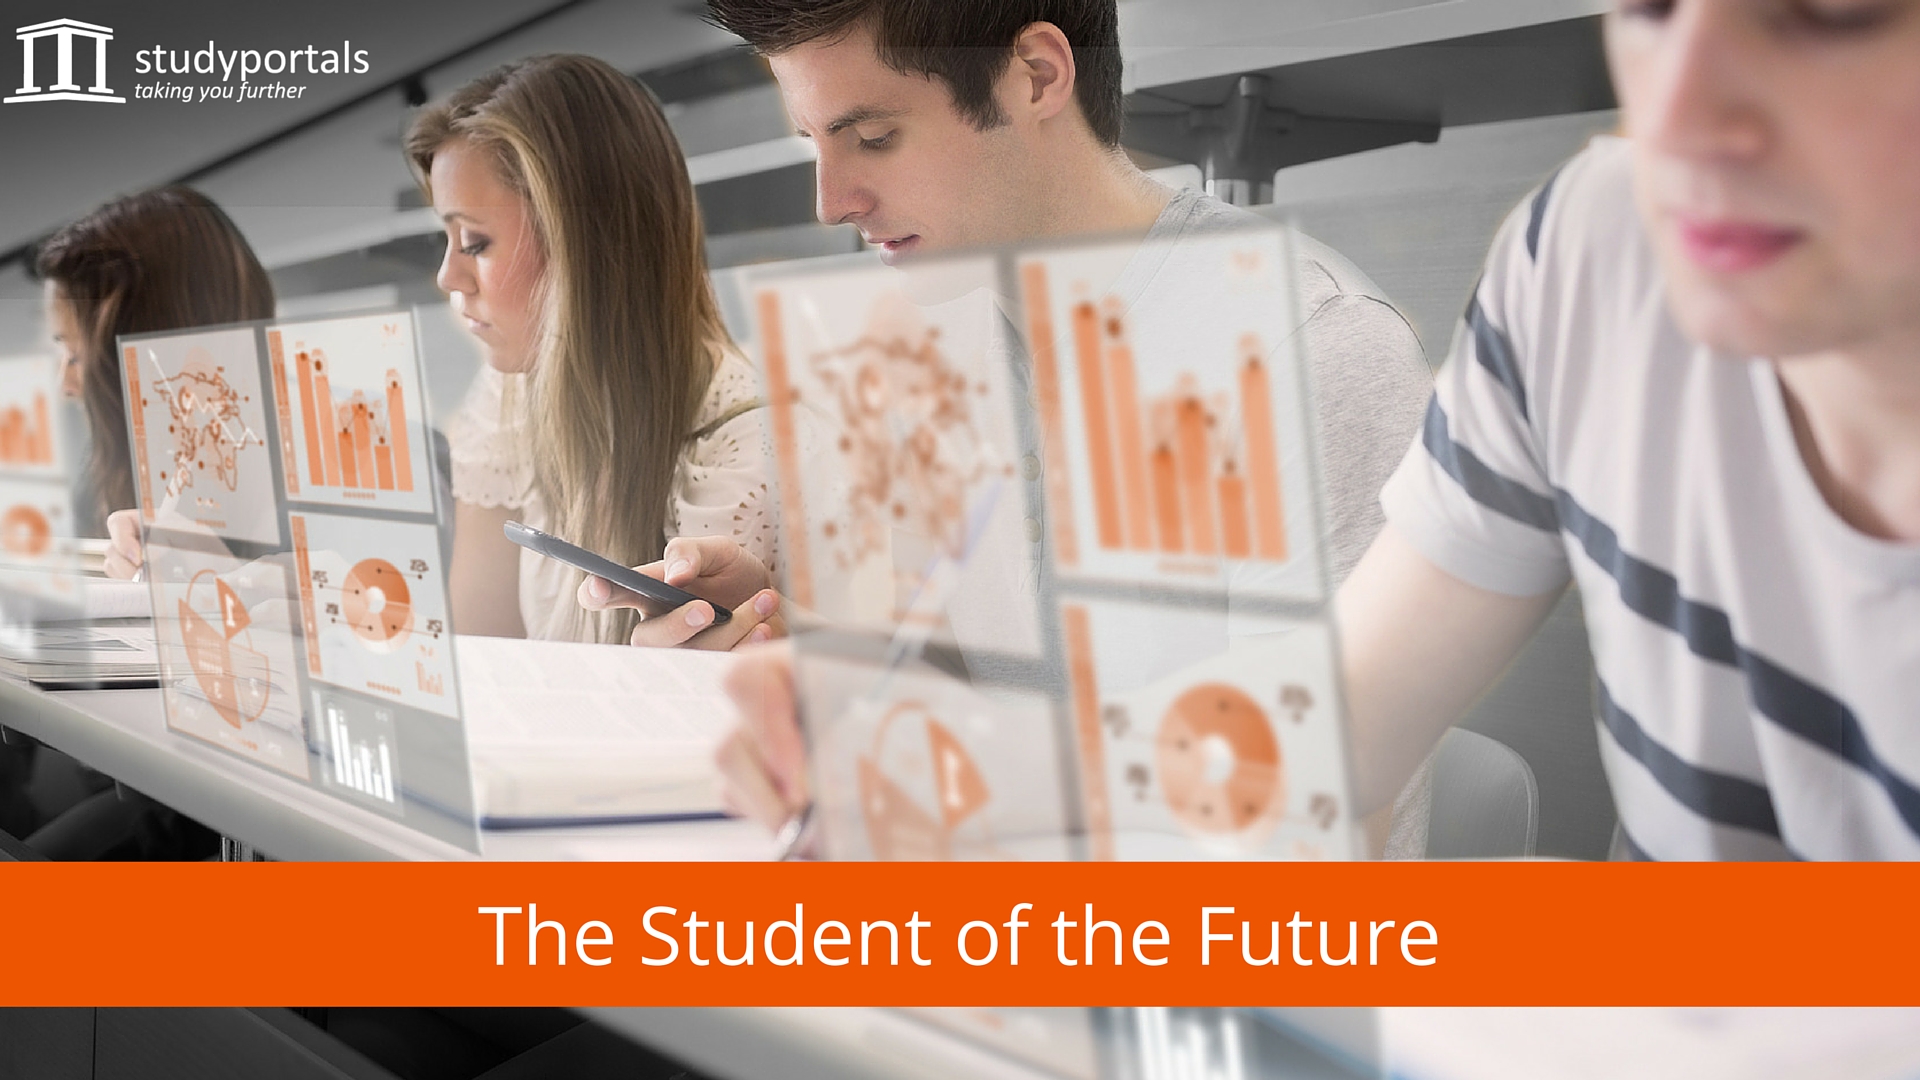 The student of the future